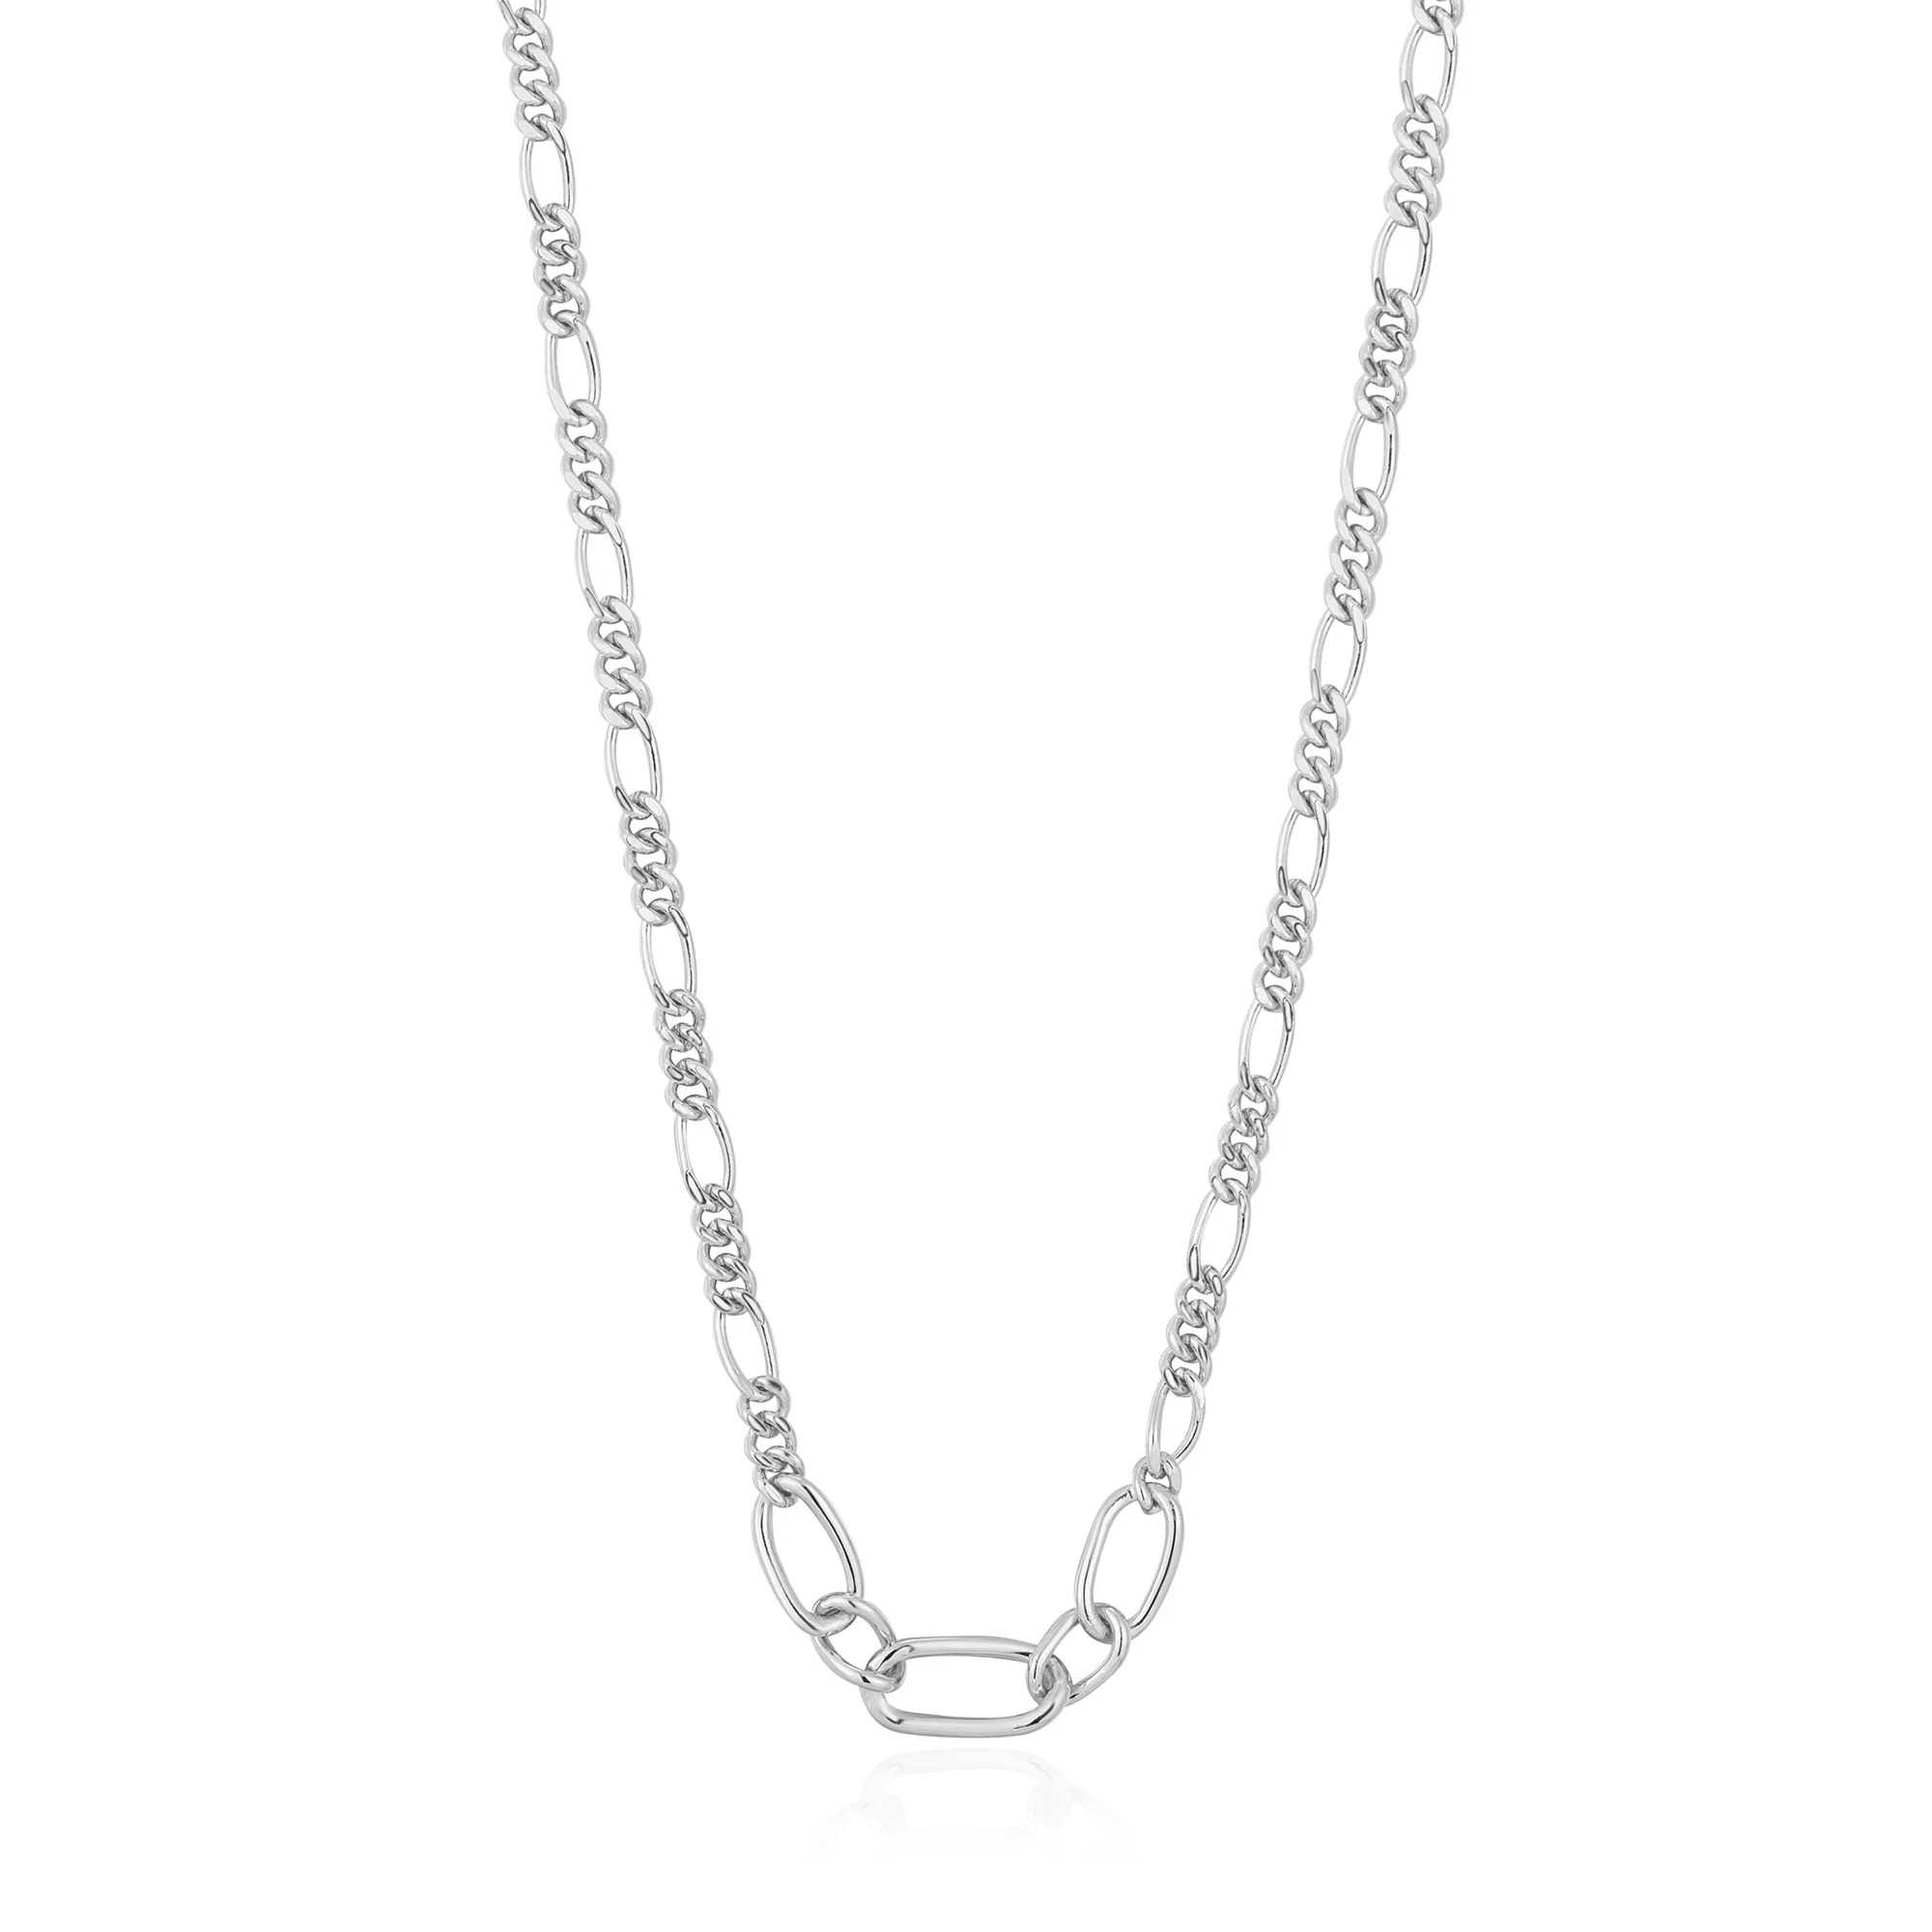 ANIA HAIE Silver Figaro Chain Necklace